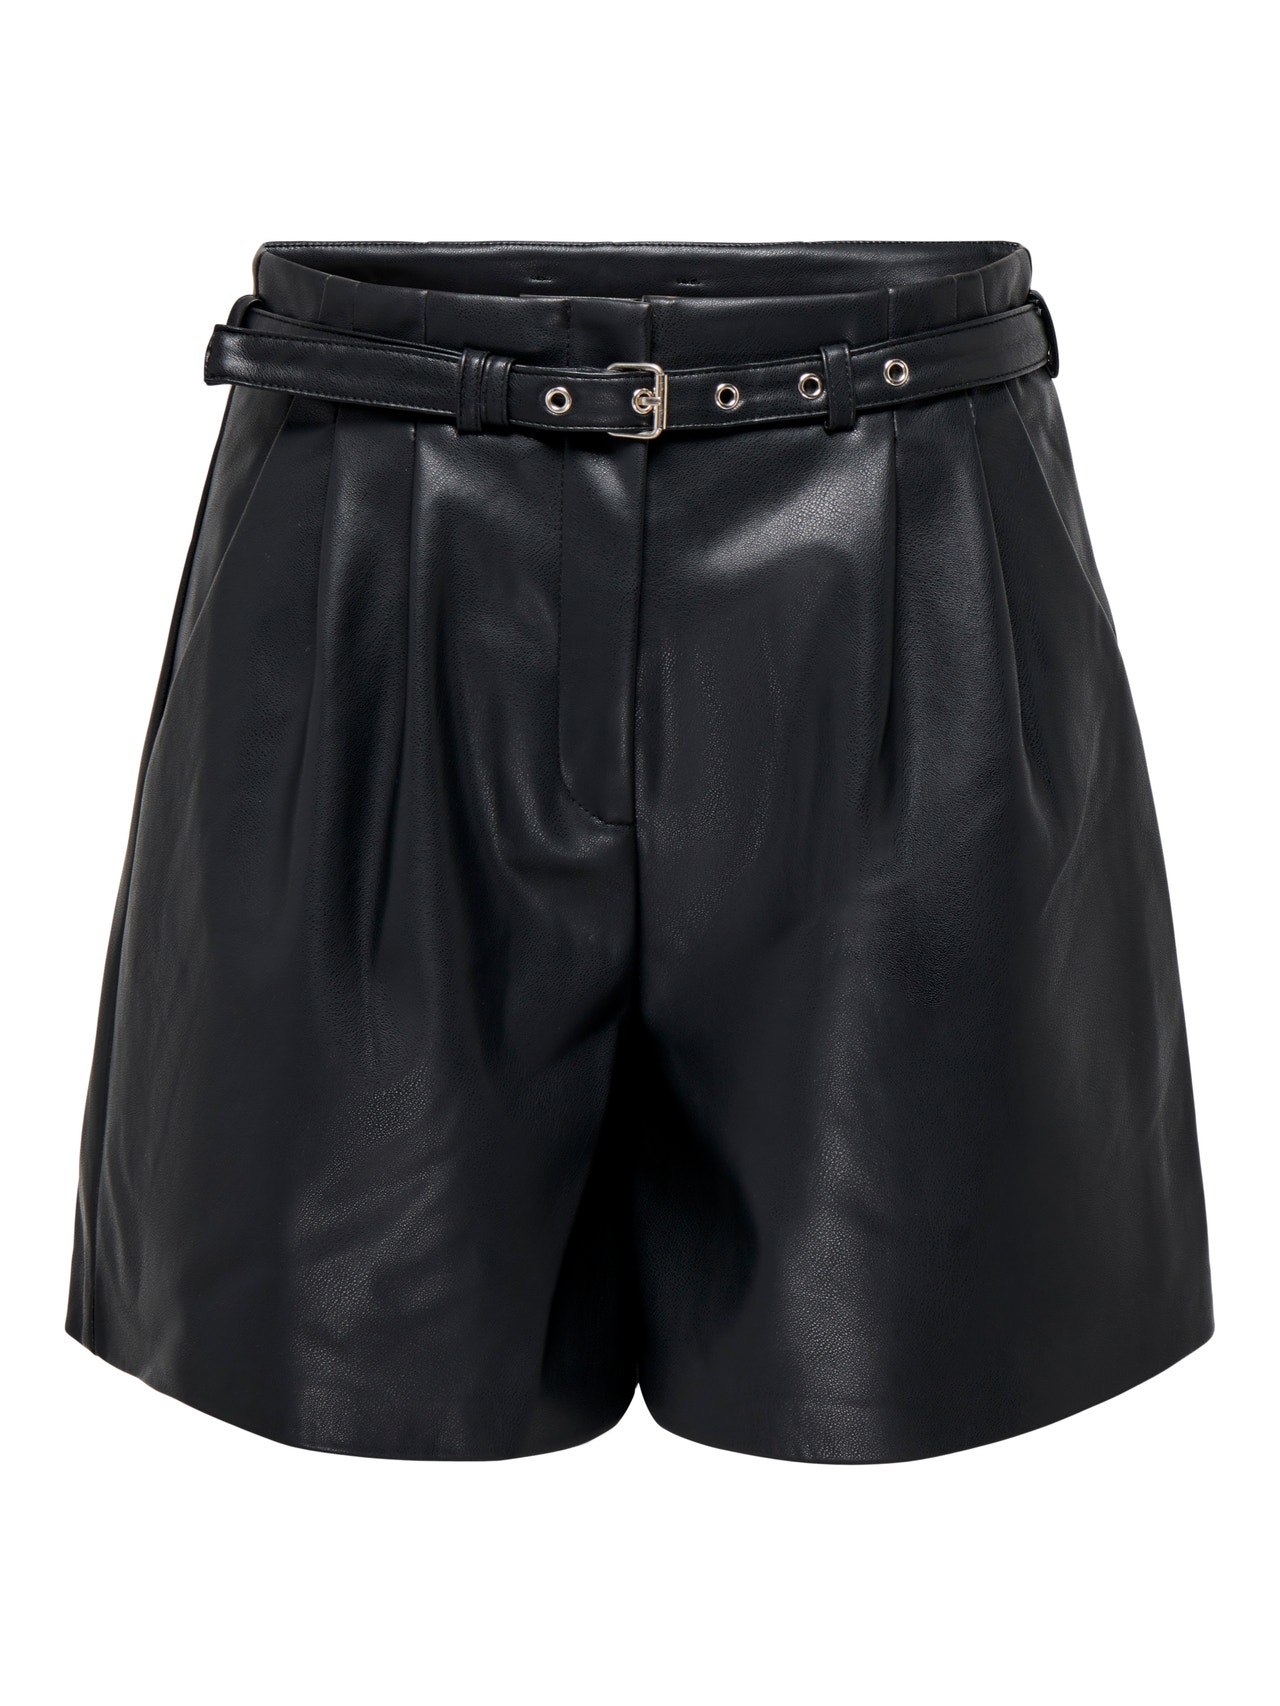 https://images.only.com/15275421/4158076/001/only-fauxleathershorts-black.jpg?v=6b6a9713d1a8b4671de81c7d280e1765&format=webp&width=1280&quality=90&key=25-0-3